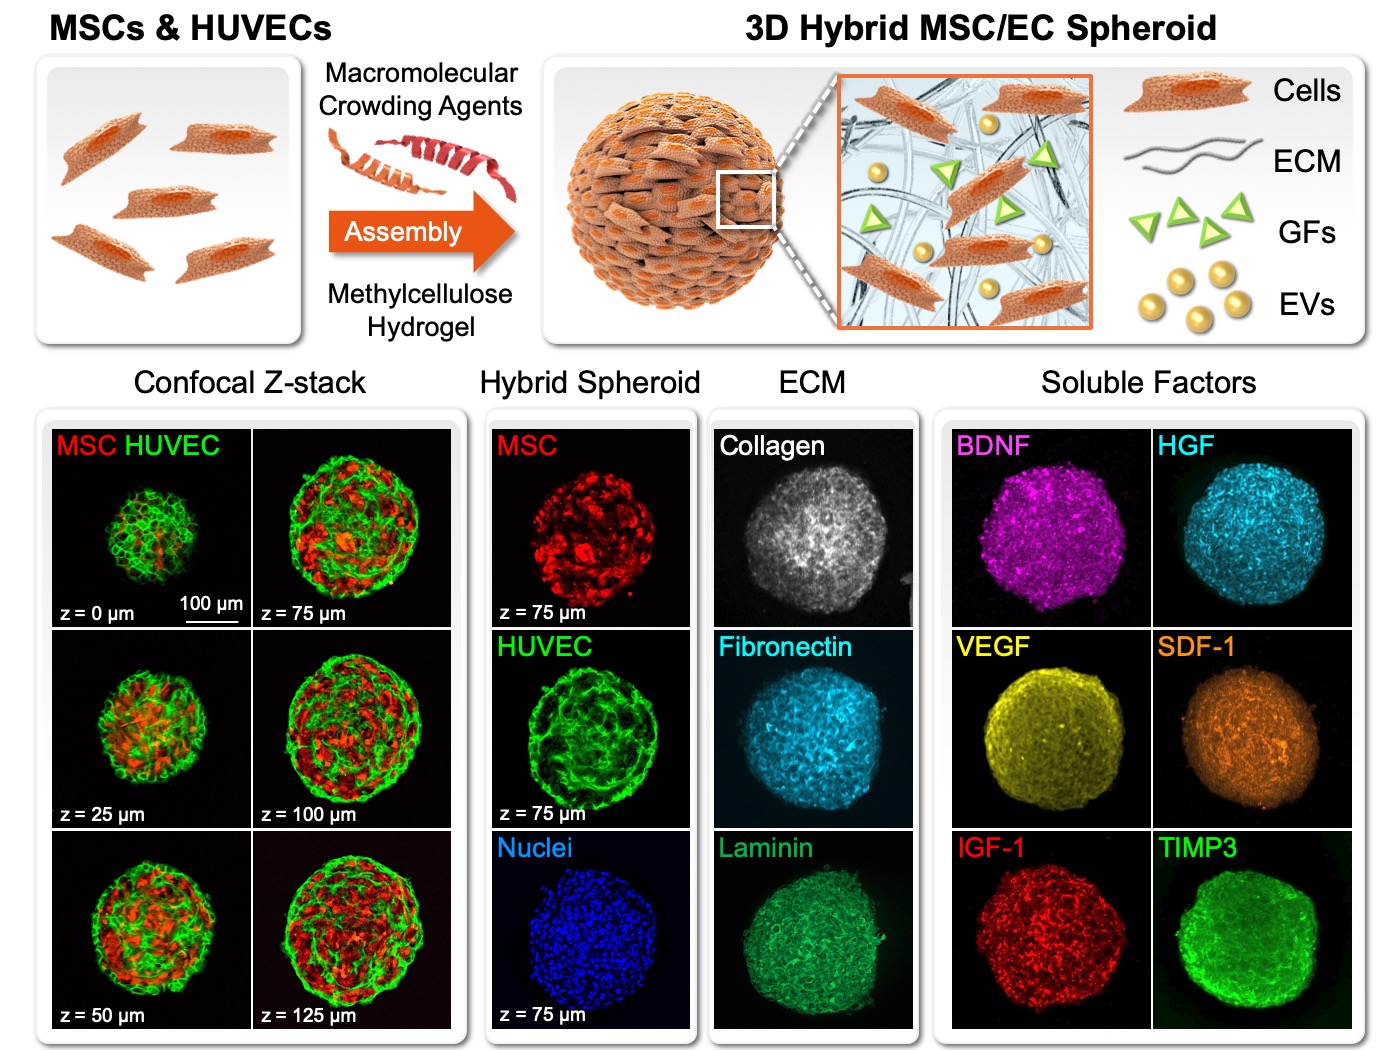 3D hybrid stem cell spheroid as a platform for cell therapy: Taking ischemic stroke treatment as an example